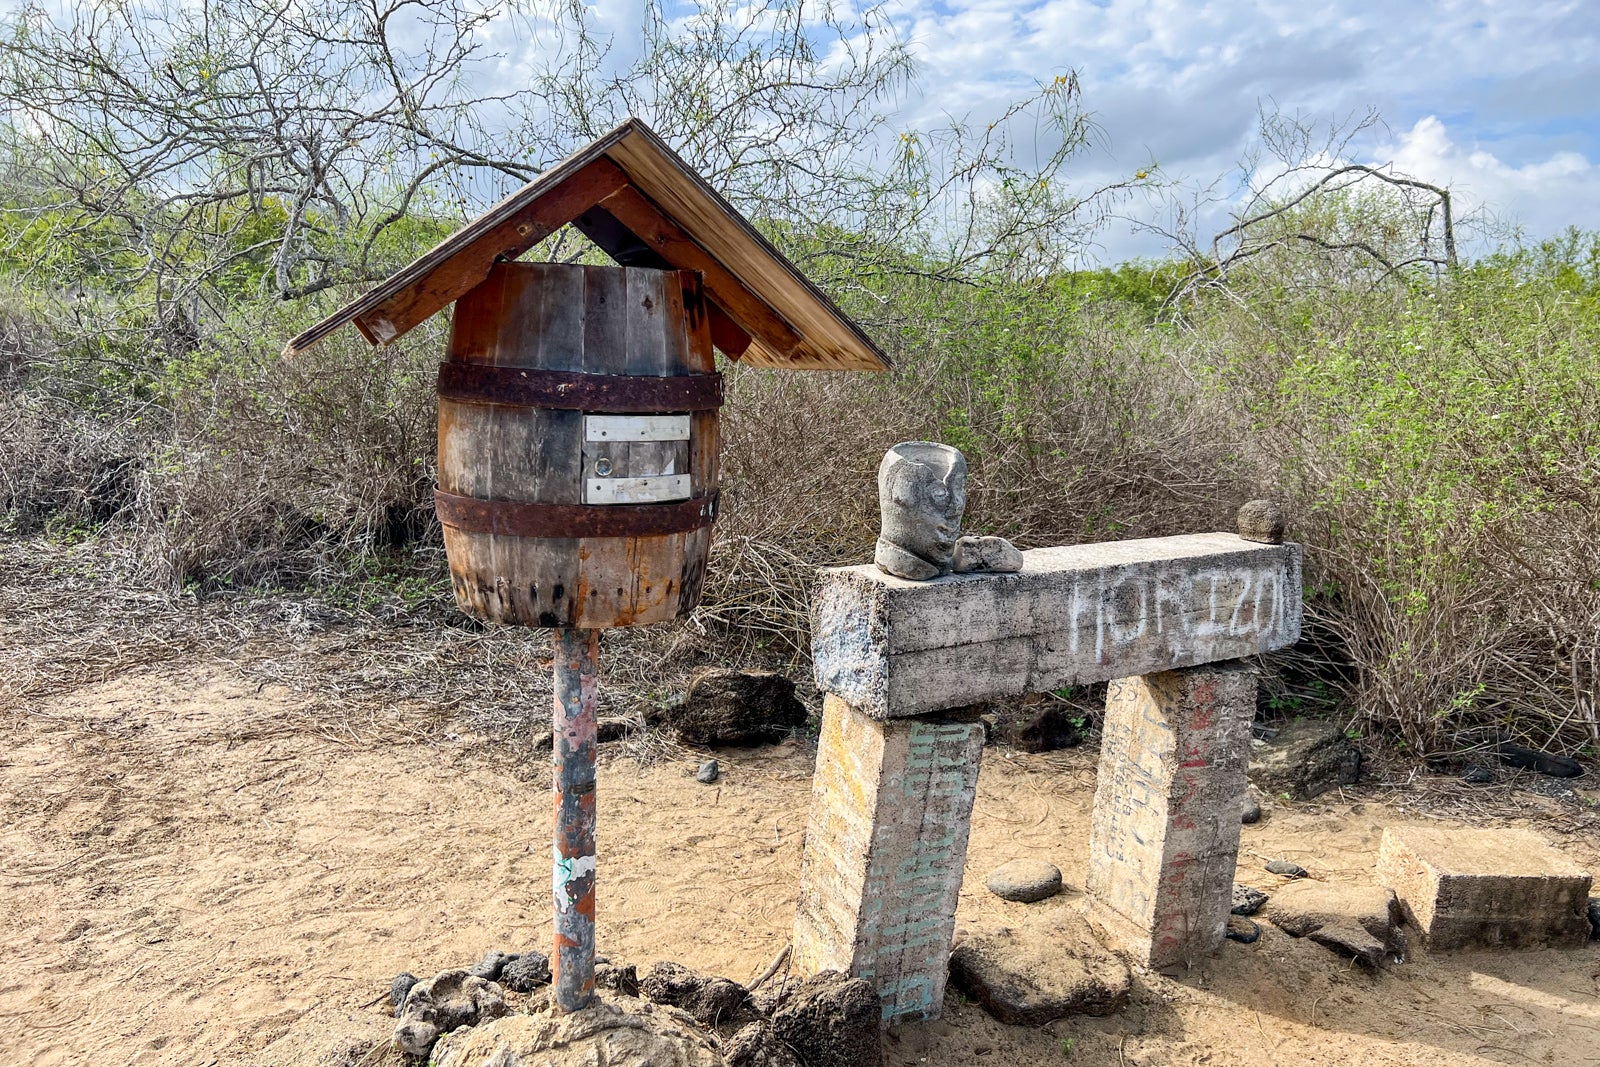 The 'post office' barrel at Post Office Bay on Floreana Island in the Galapagos. 